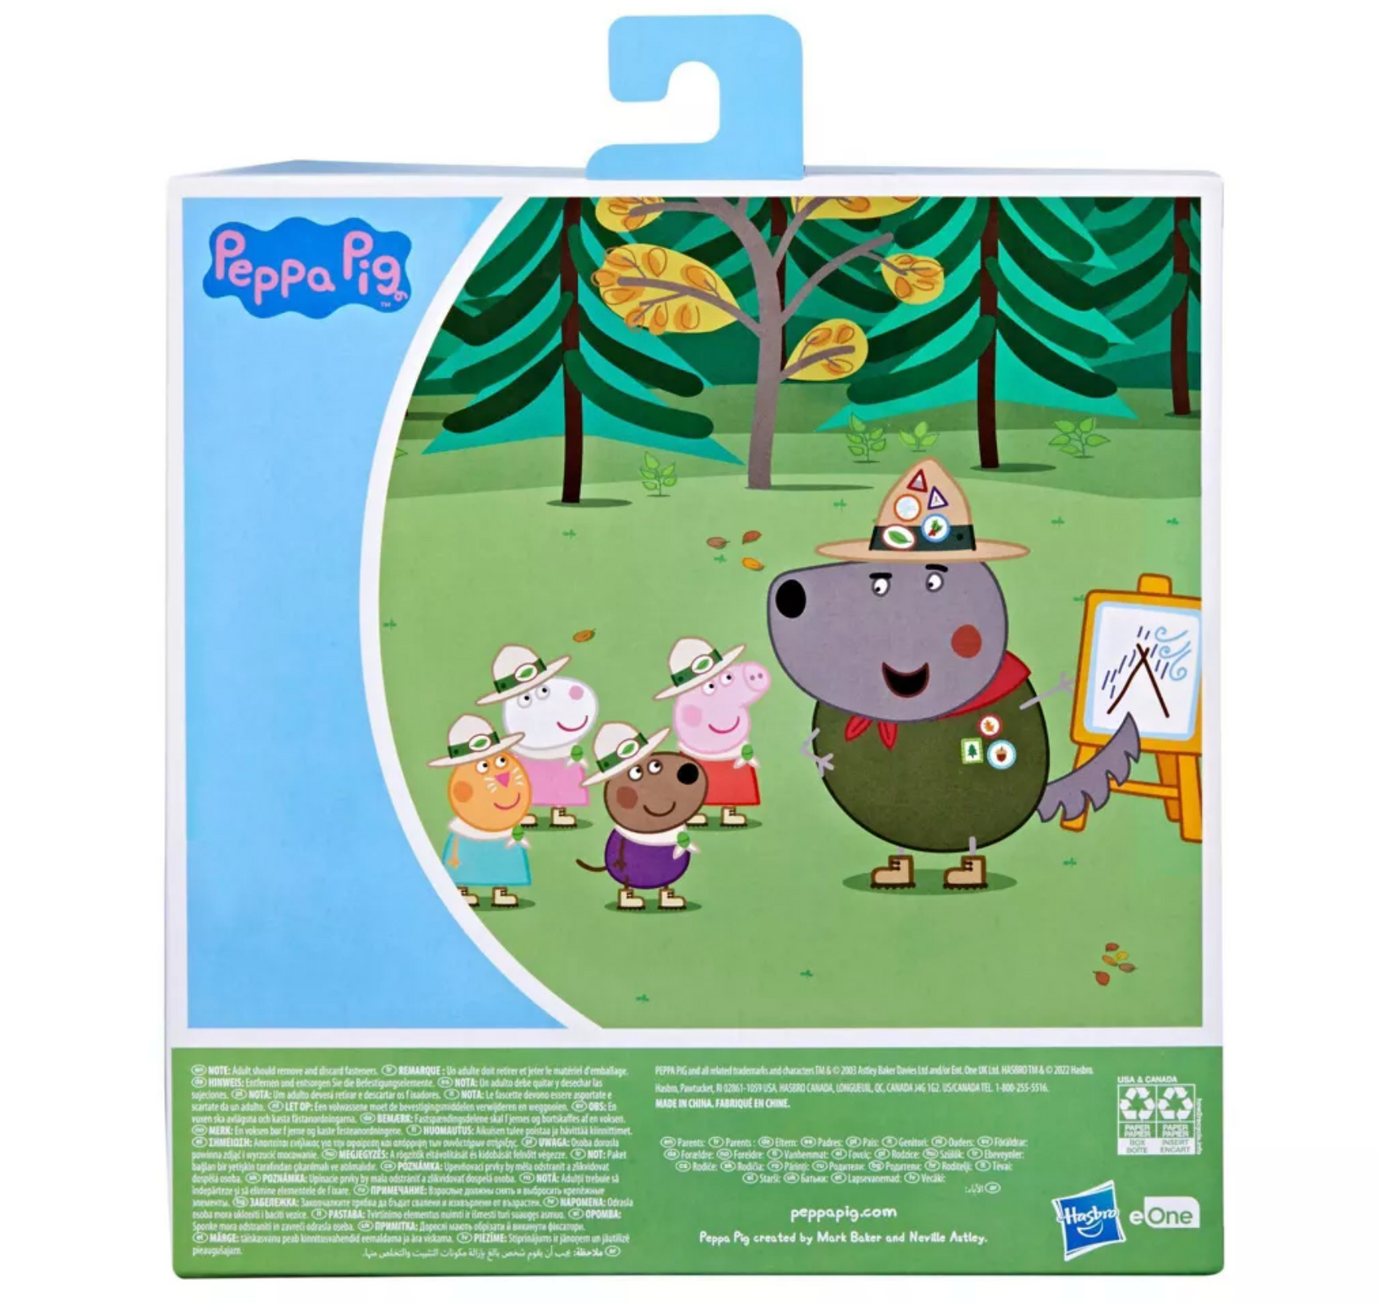 Peppa Pig Mini Camping Friends Mini Figures Target Exclusive New with Box